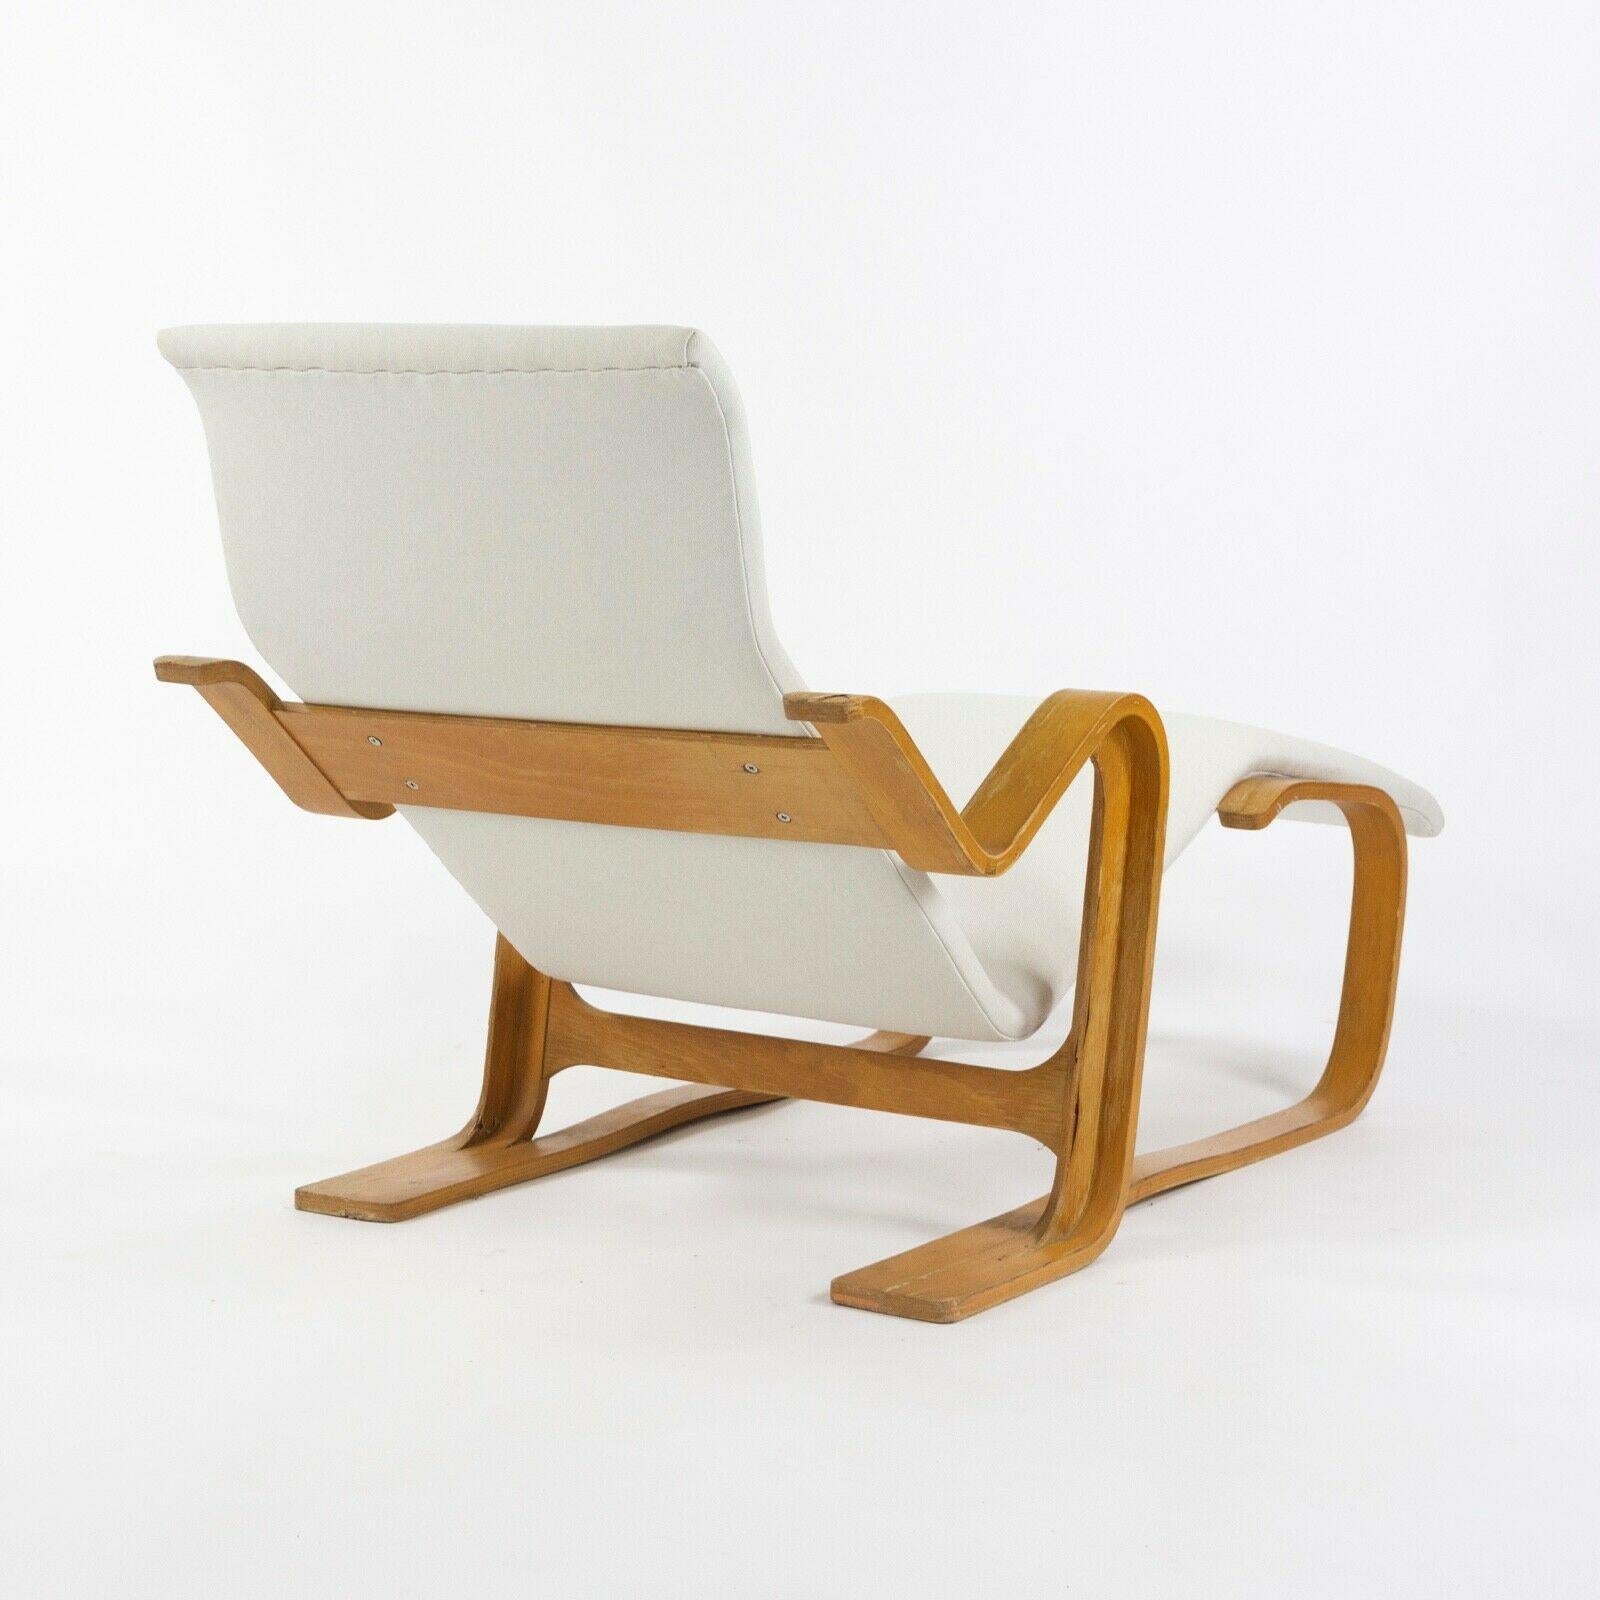 Mid-20th Century 1960s Marcel Breuer for Knoll Isokon Chaise Lounge Chair New White Upholstery For Sale